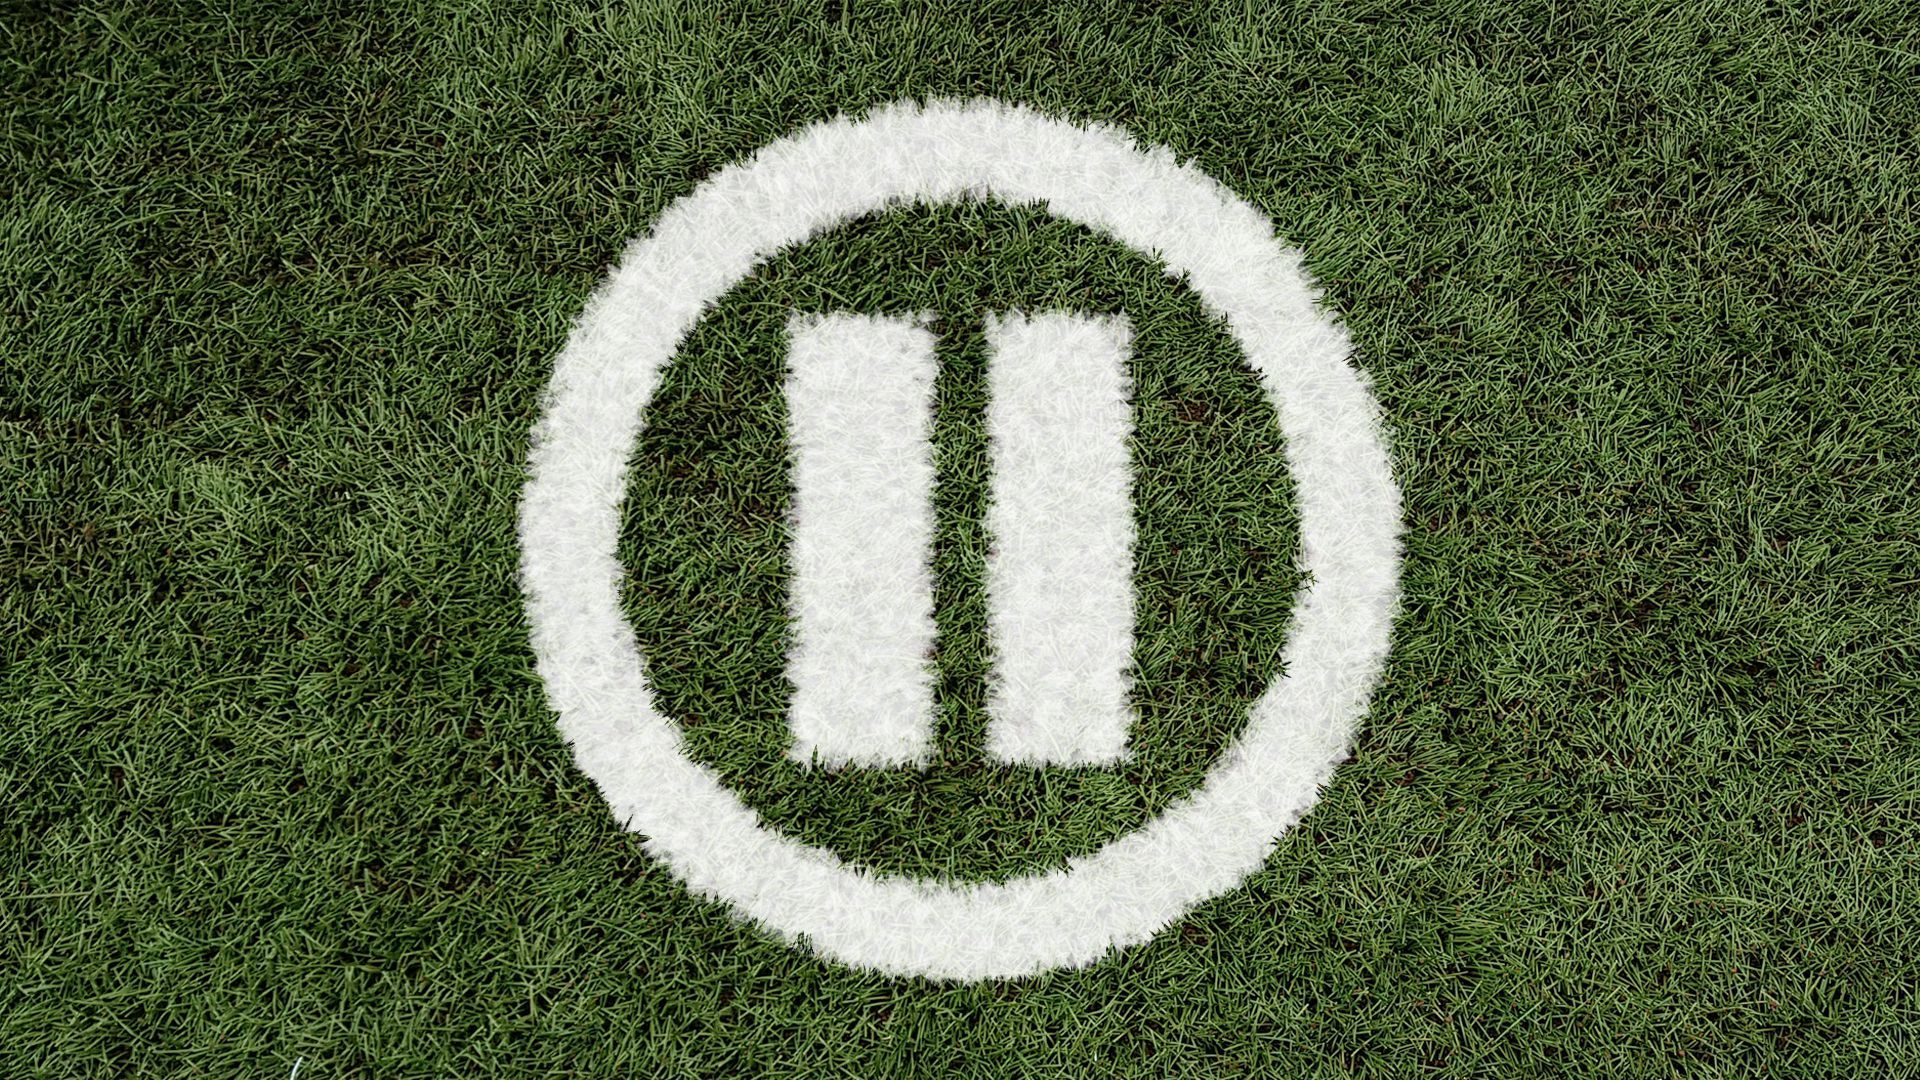 Illustration of a pause-button symbol painted on a grass field.